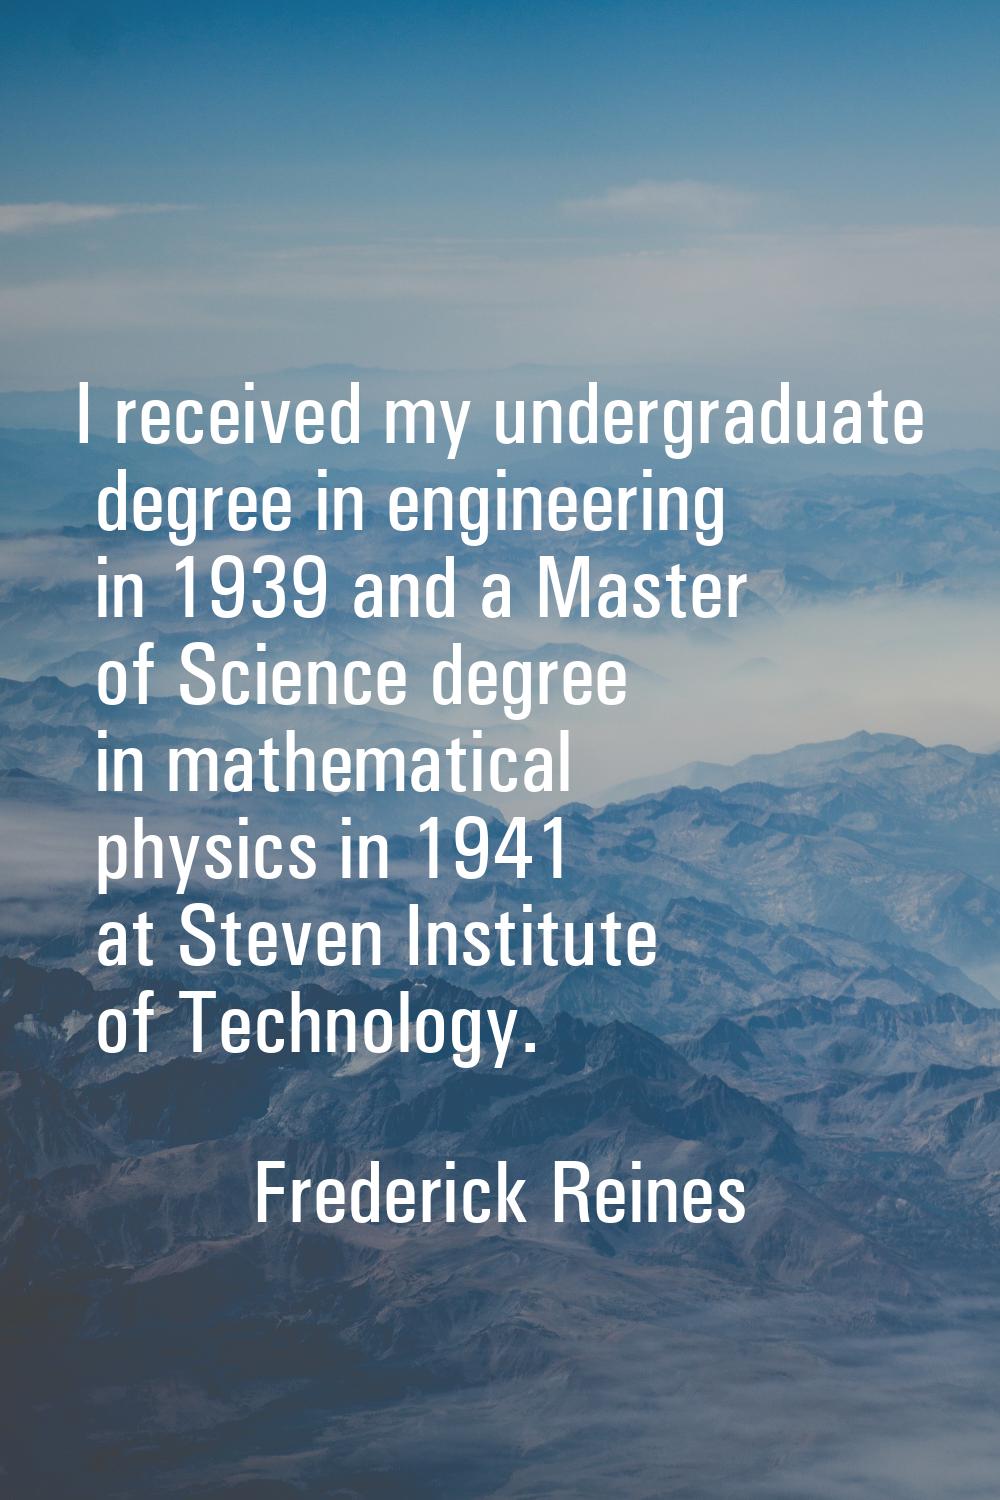 I received my undergraduate degree in engineering in 1939 and a Master of Science degree in mathema